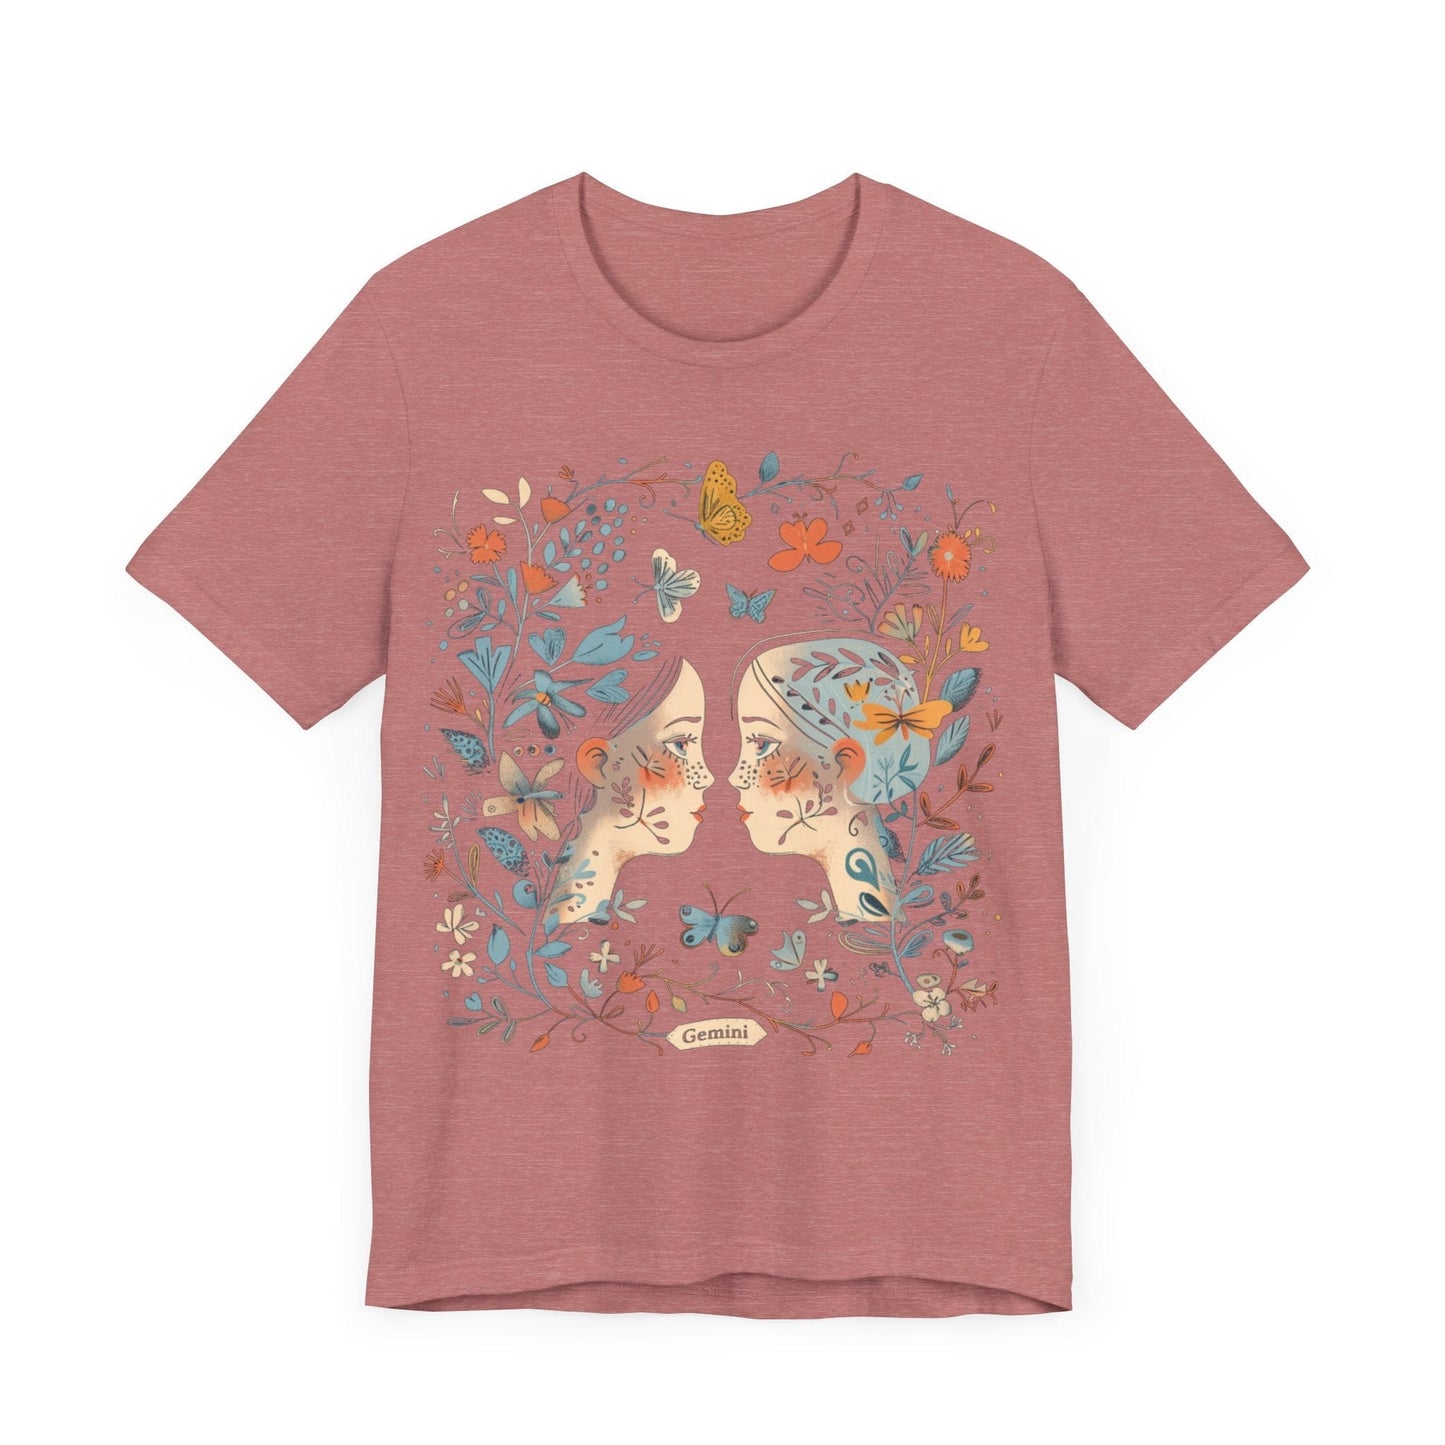 T-Shirt Heather Mauve / S Gemini Floral Whisper T-Shirt: A Dance of Duality in Nature's Embrace